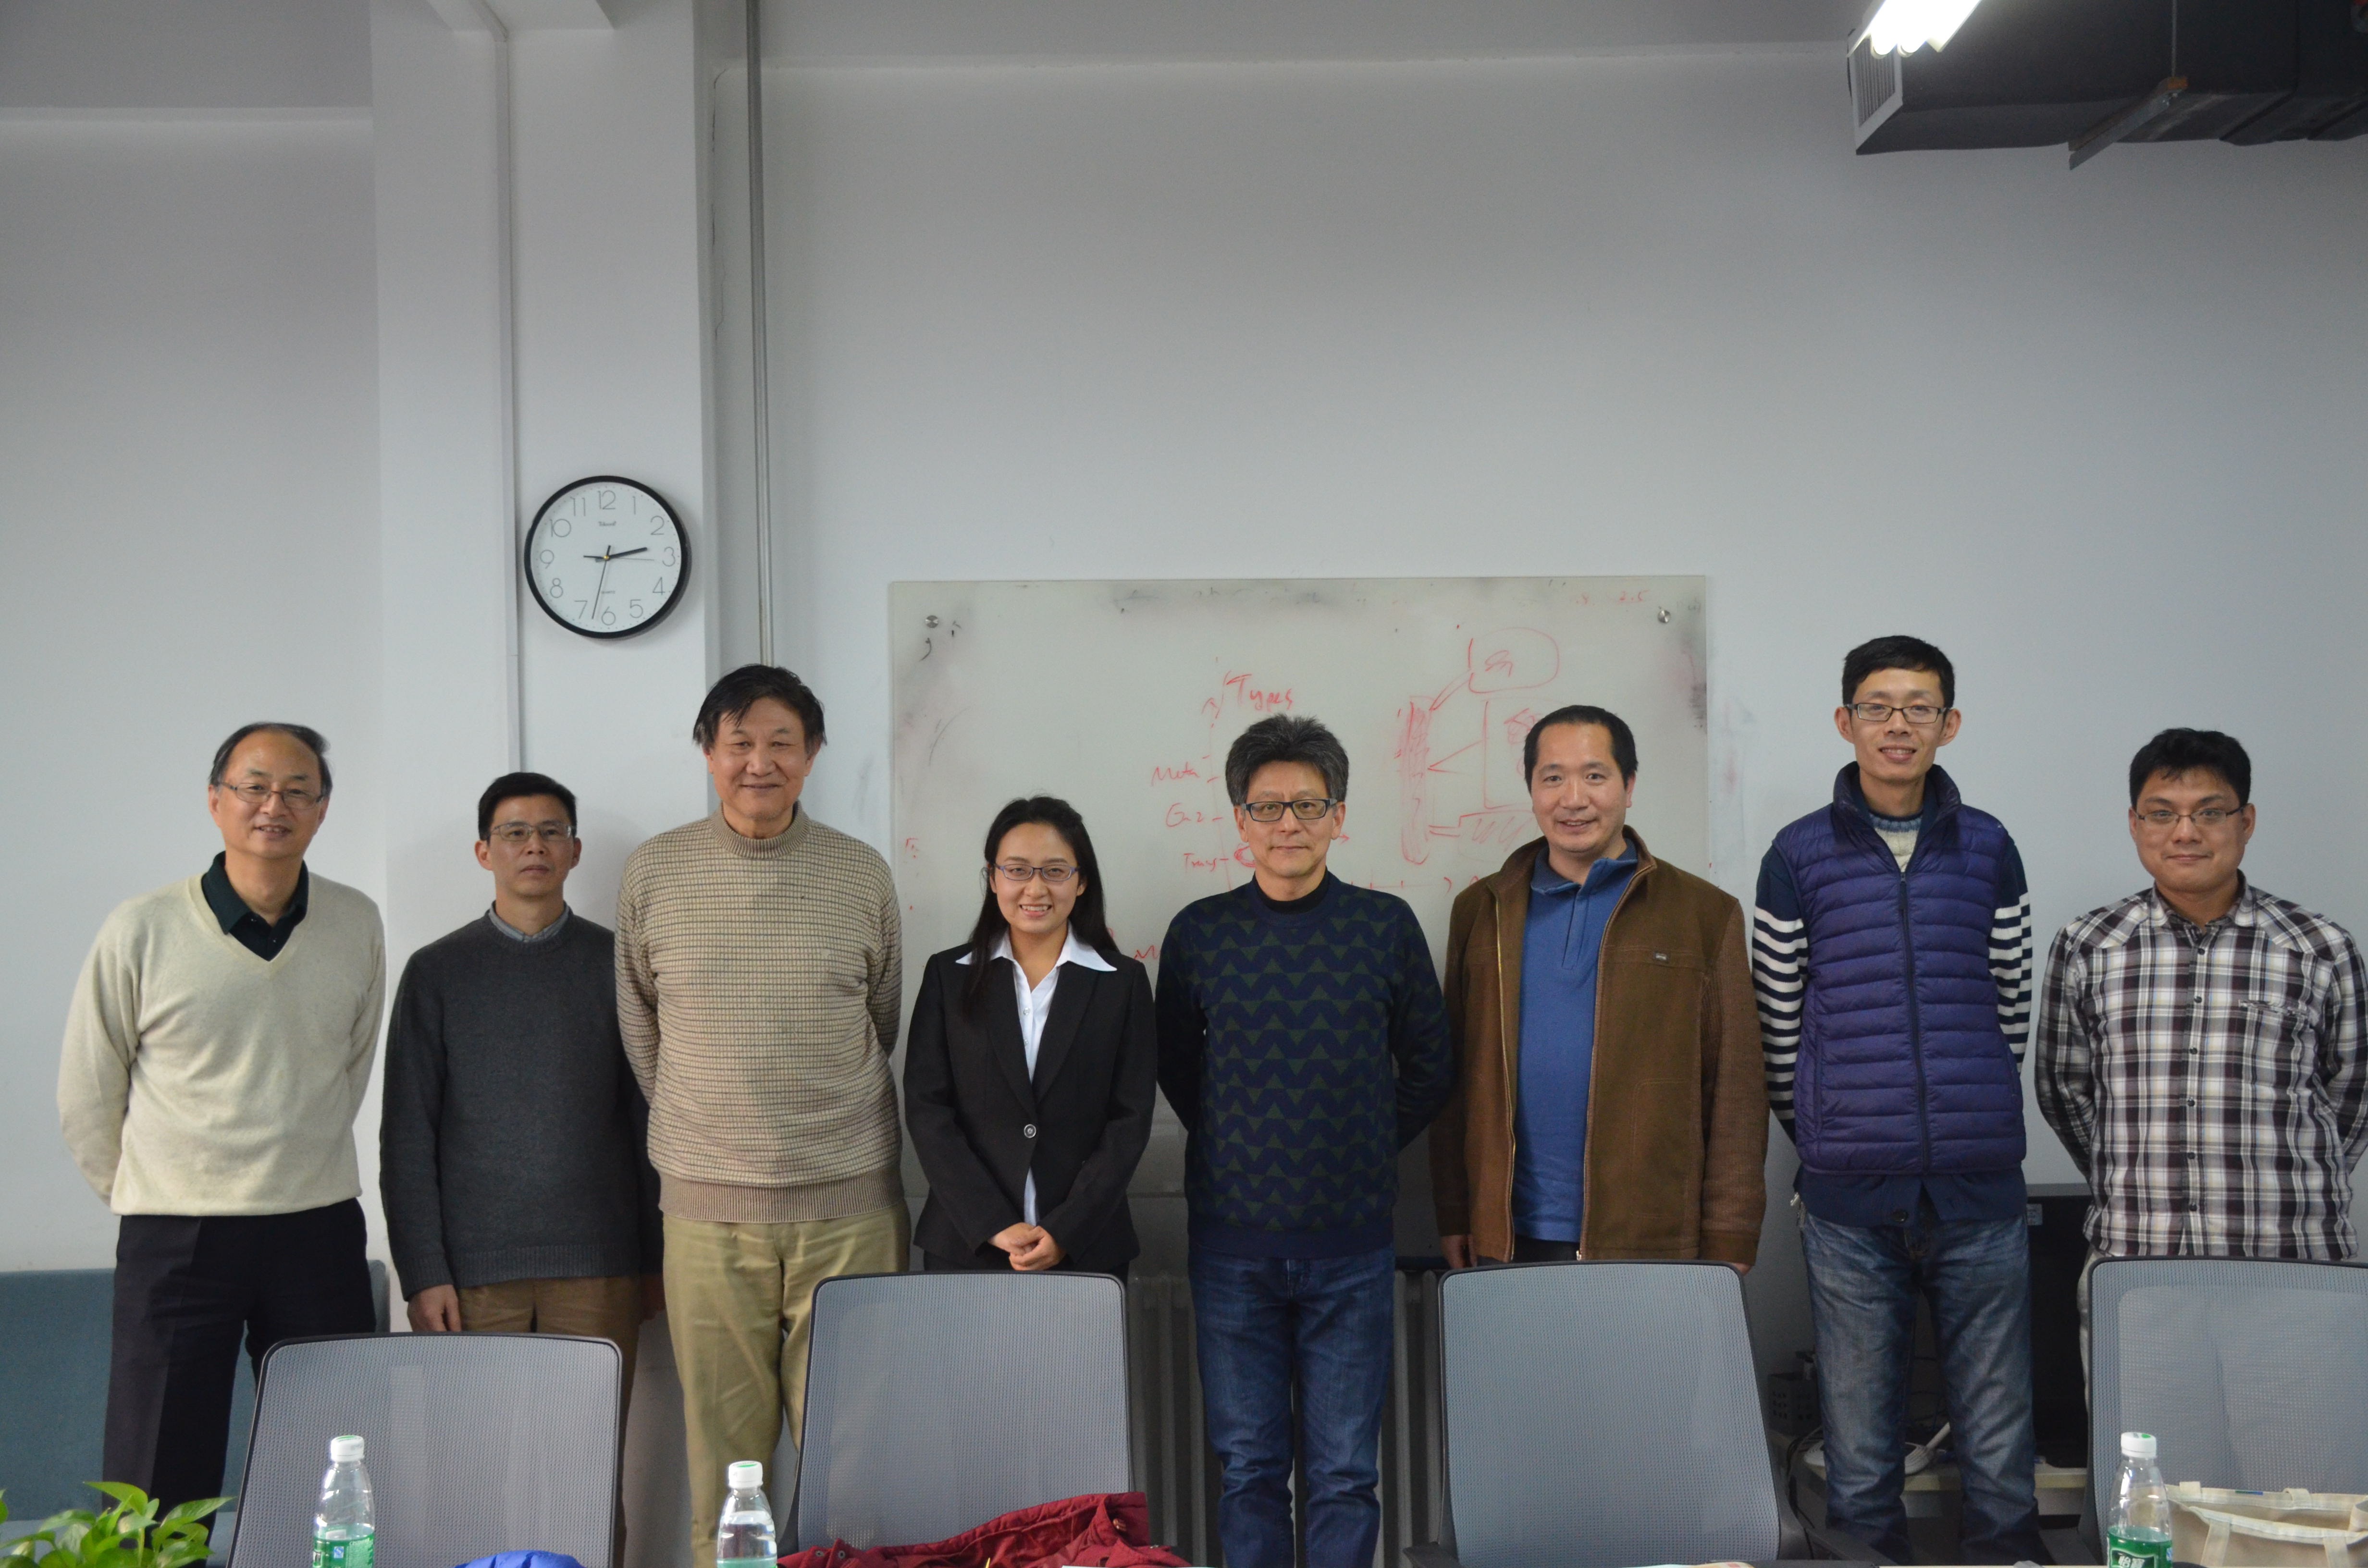 Wenjia Shi obtains her Ph.D. degree